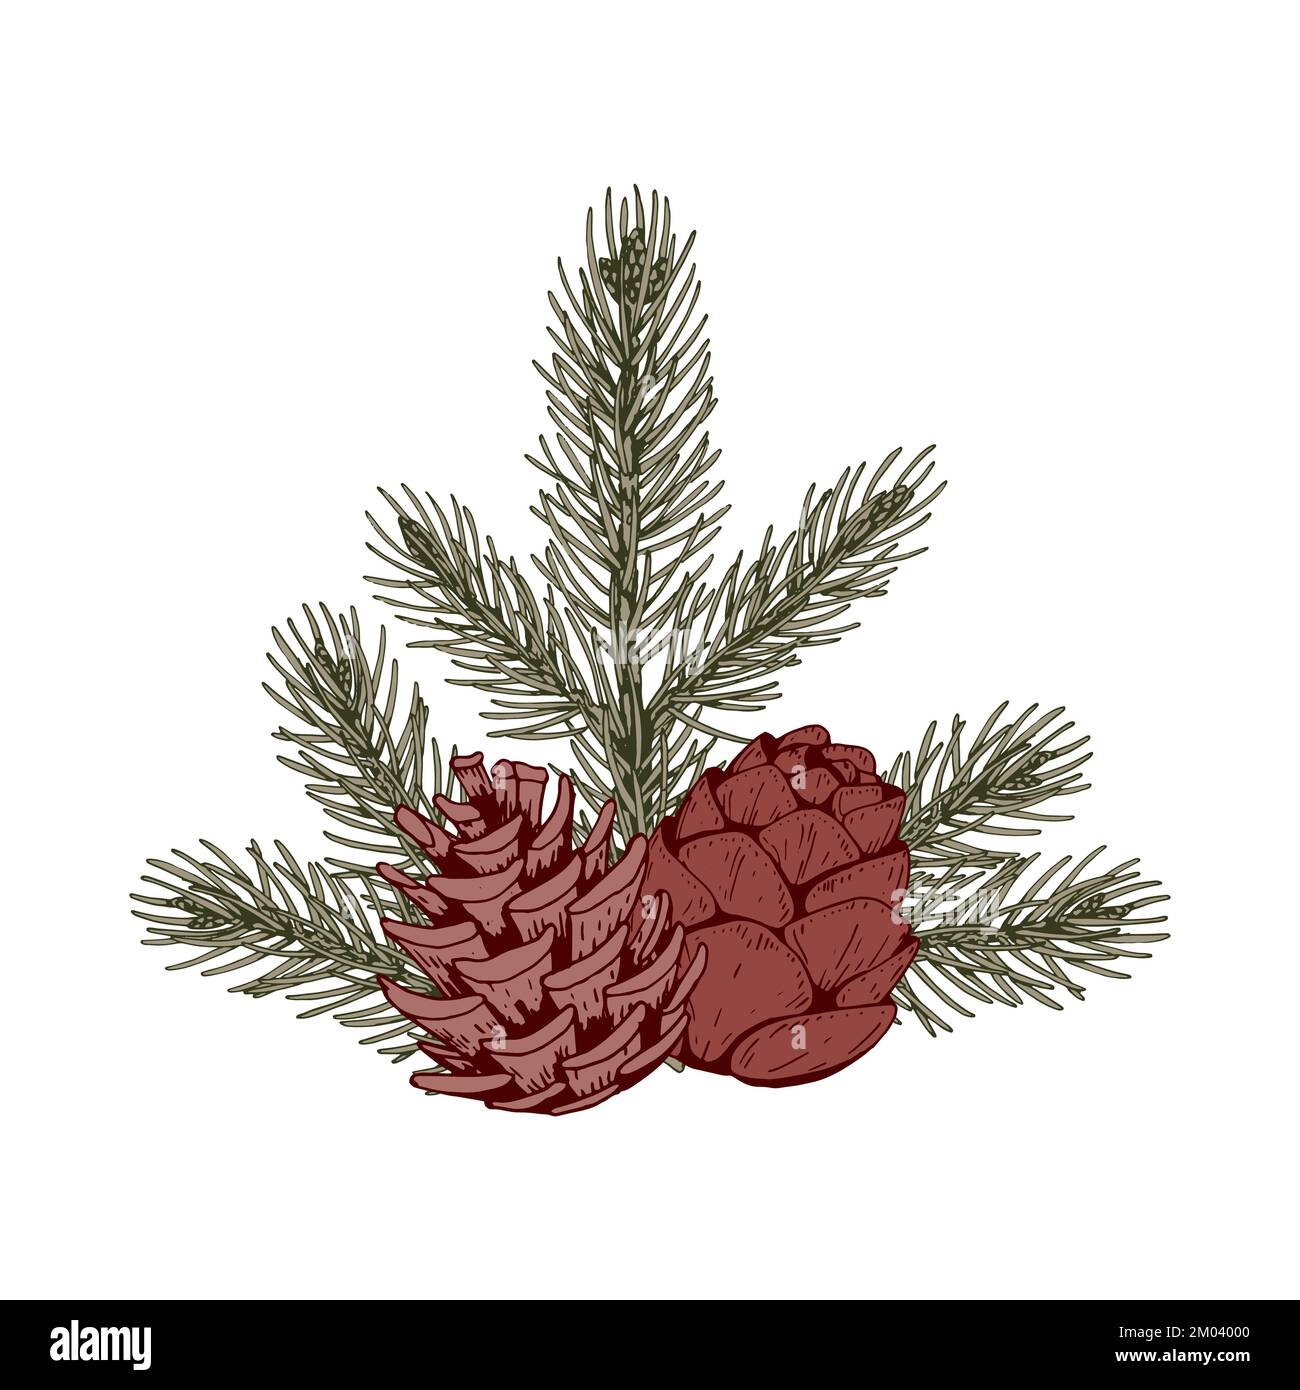 Christmas botany composition with pine tree branches and cones. Vector illustration in sketch style isolated on white background Stock Vector